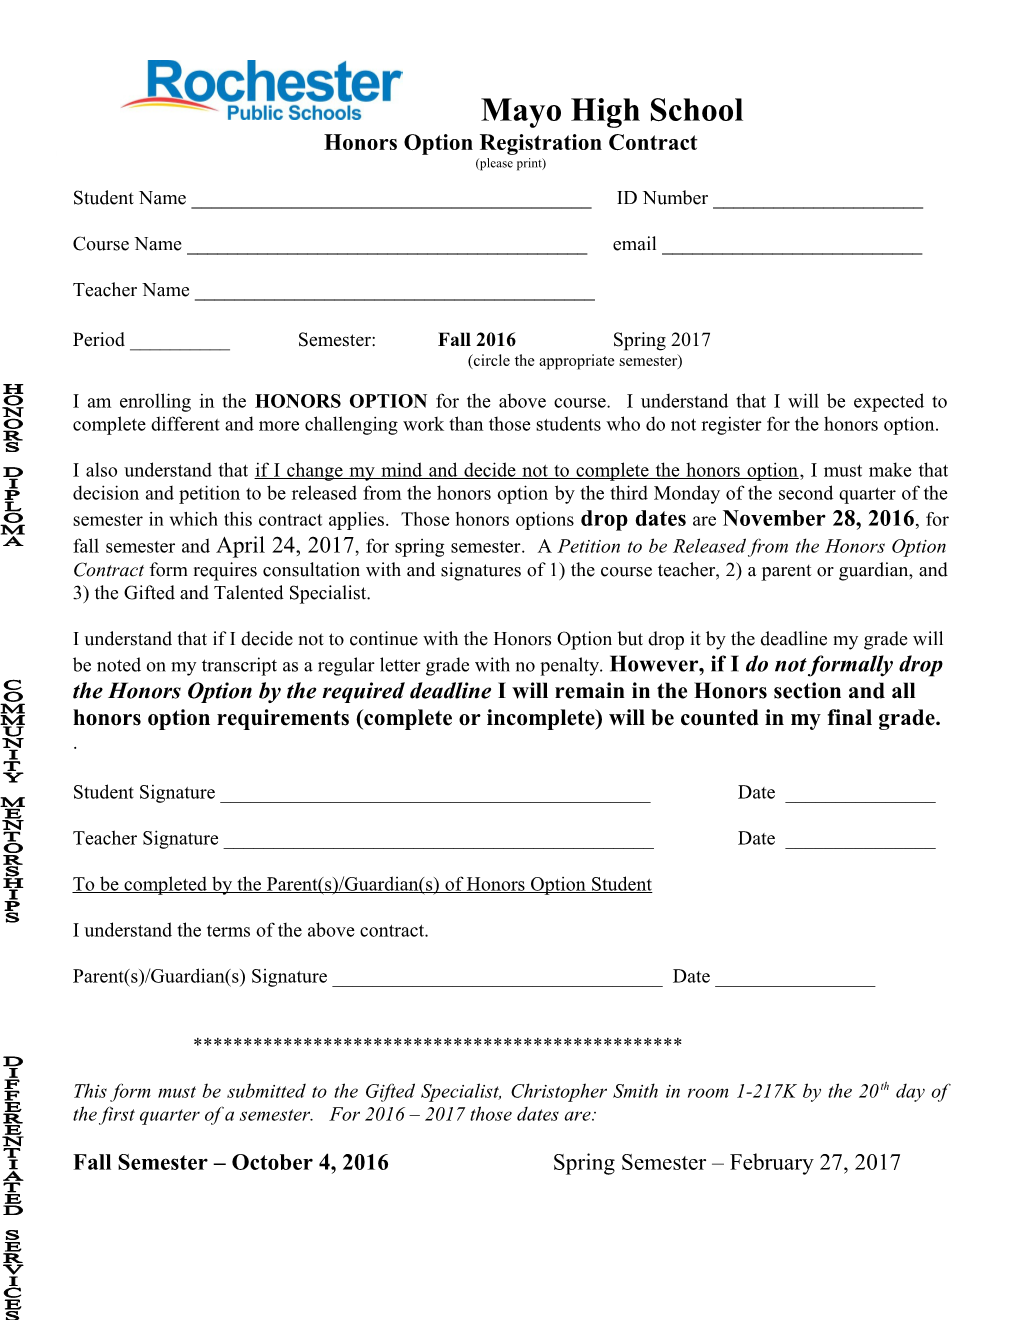 Honors Option Registration Contract